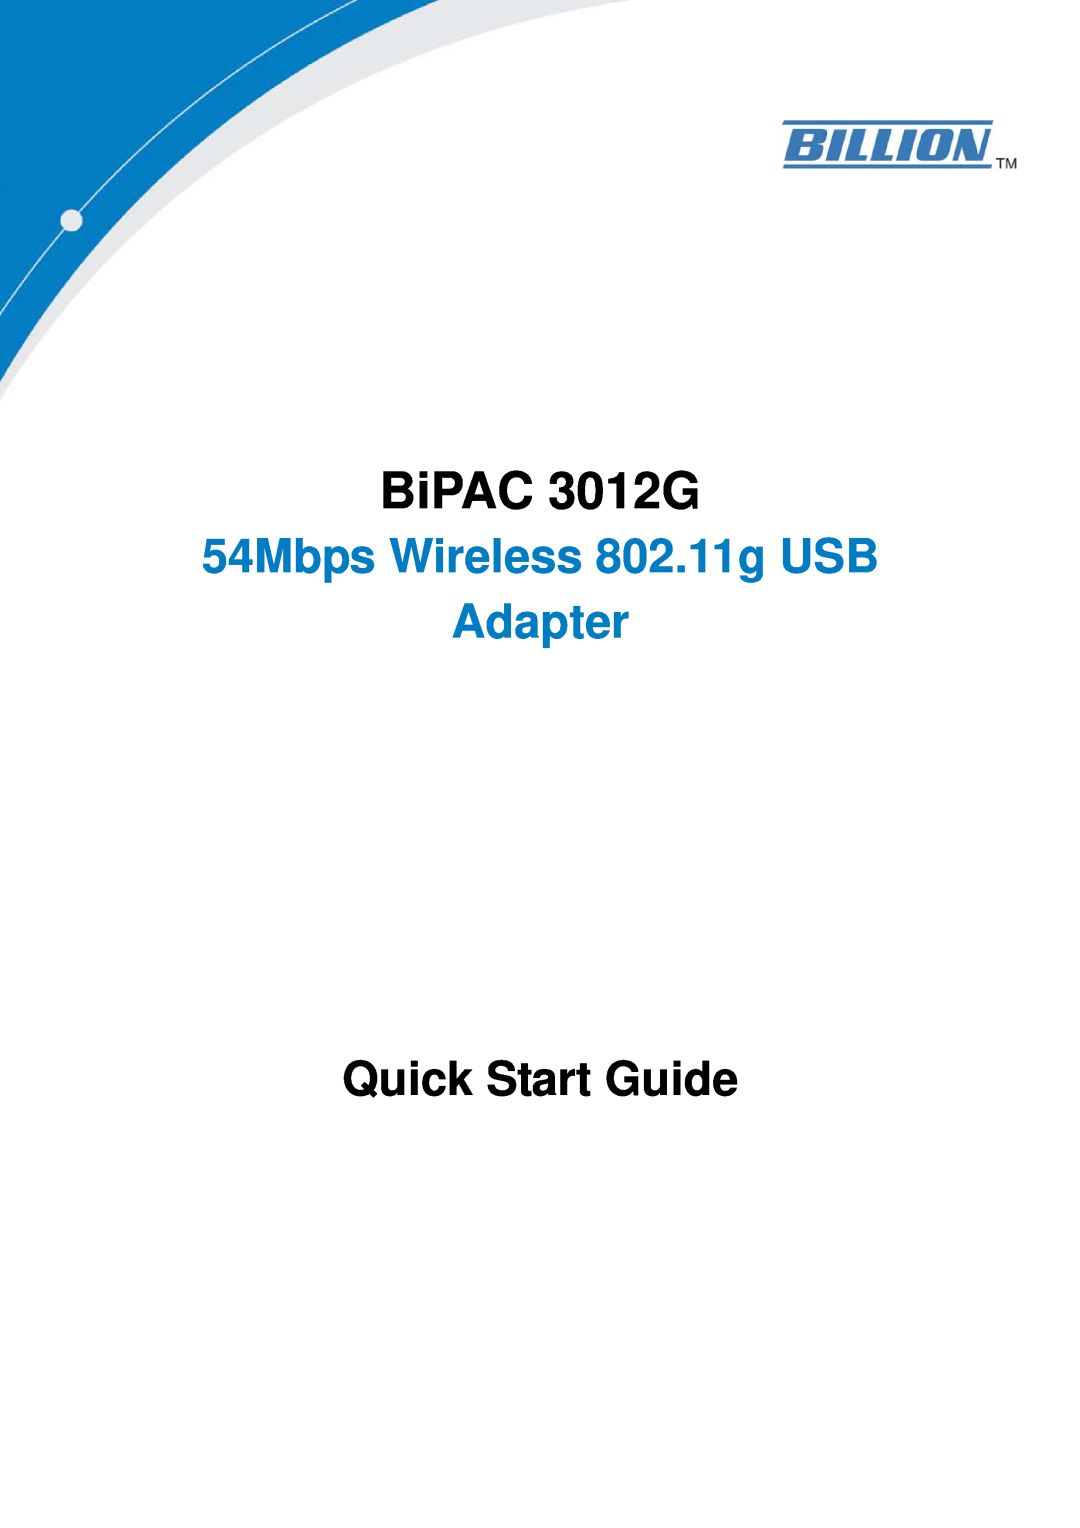 Billion Electric Company BIPAC 3012G quick start BiPAC 3012G, 54Mbps Wireless 802.11g USB Adapter, Quick Start Guide 